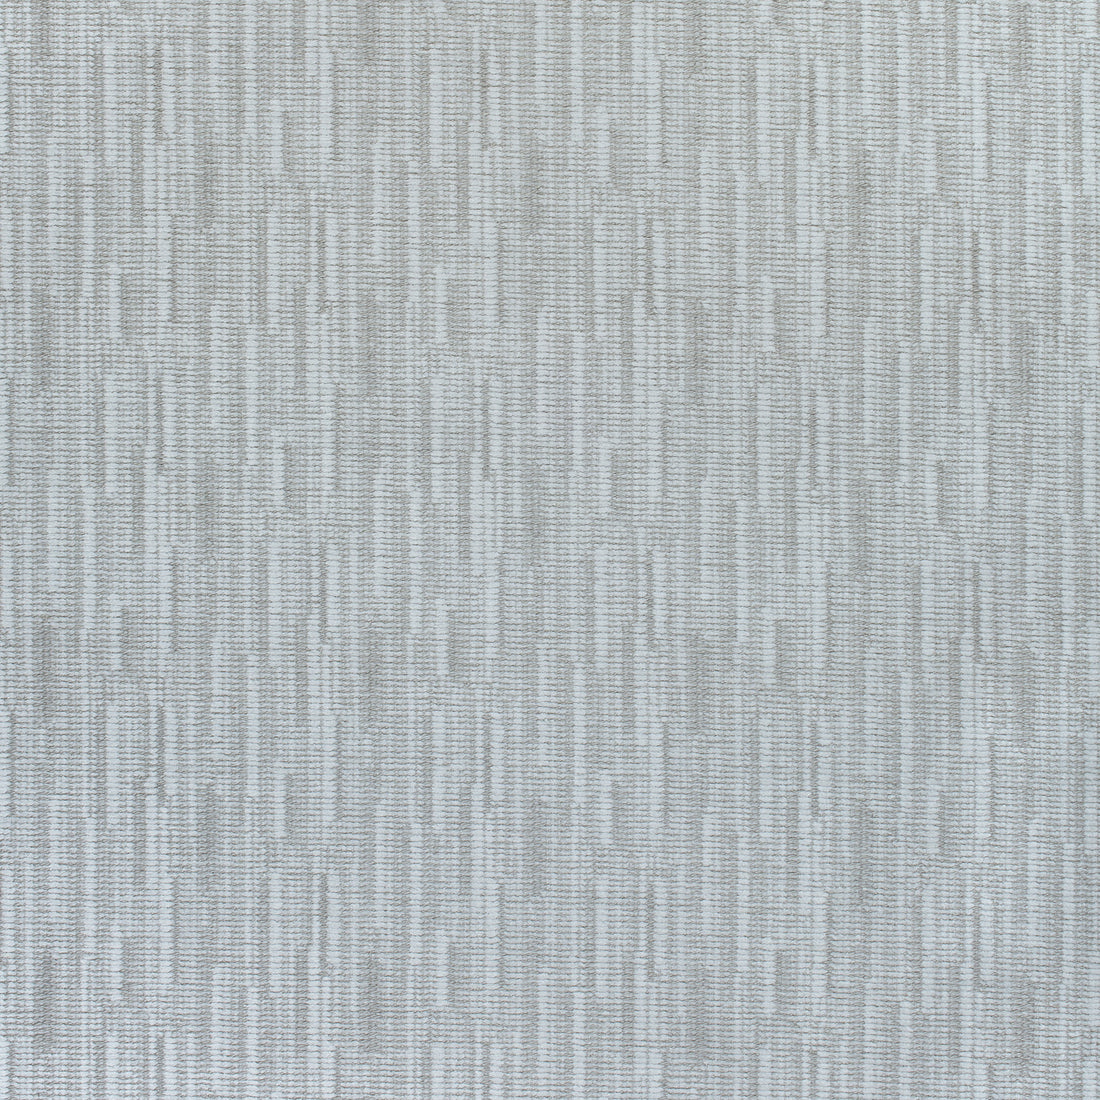 Dominic fabric in sterling grey color - pattern number W789125 - by Thibaut in the Reverie collection